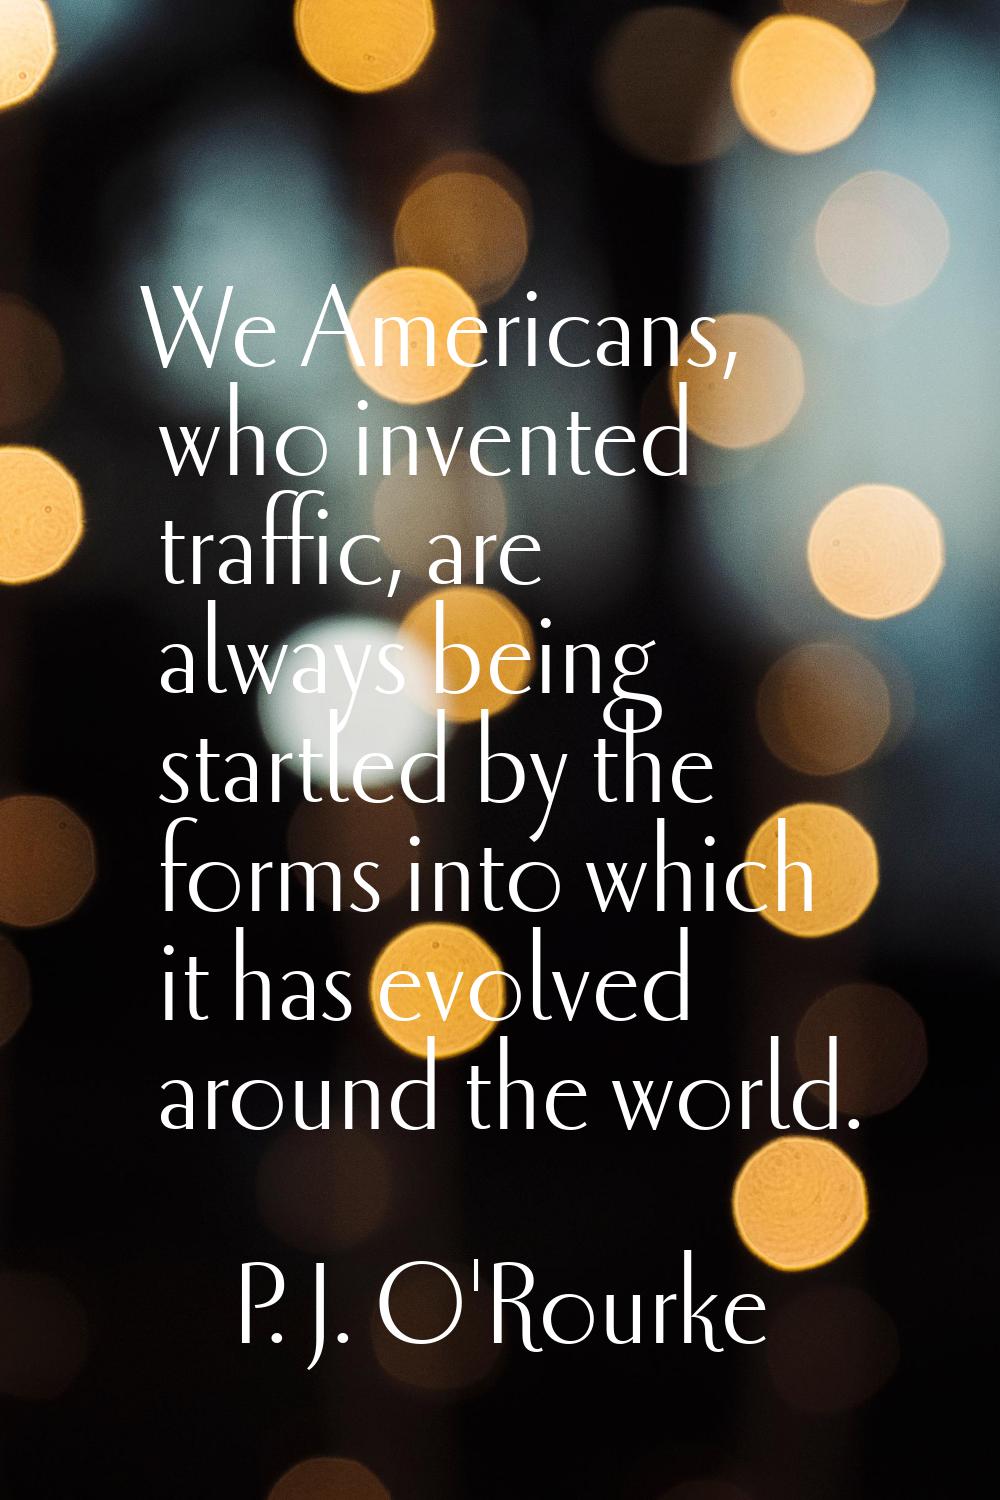 We Americans, who invented traffic, are always being startled by the forms into which it has evolve